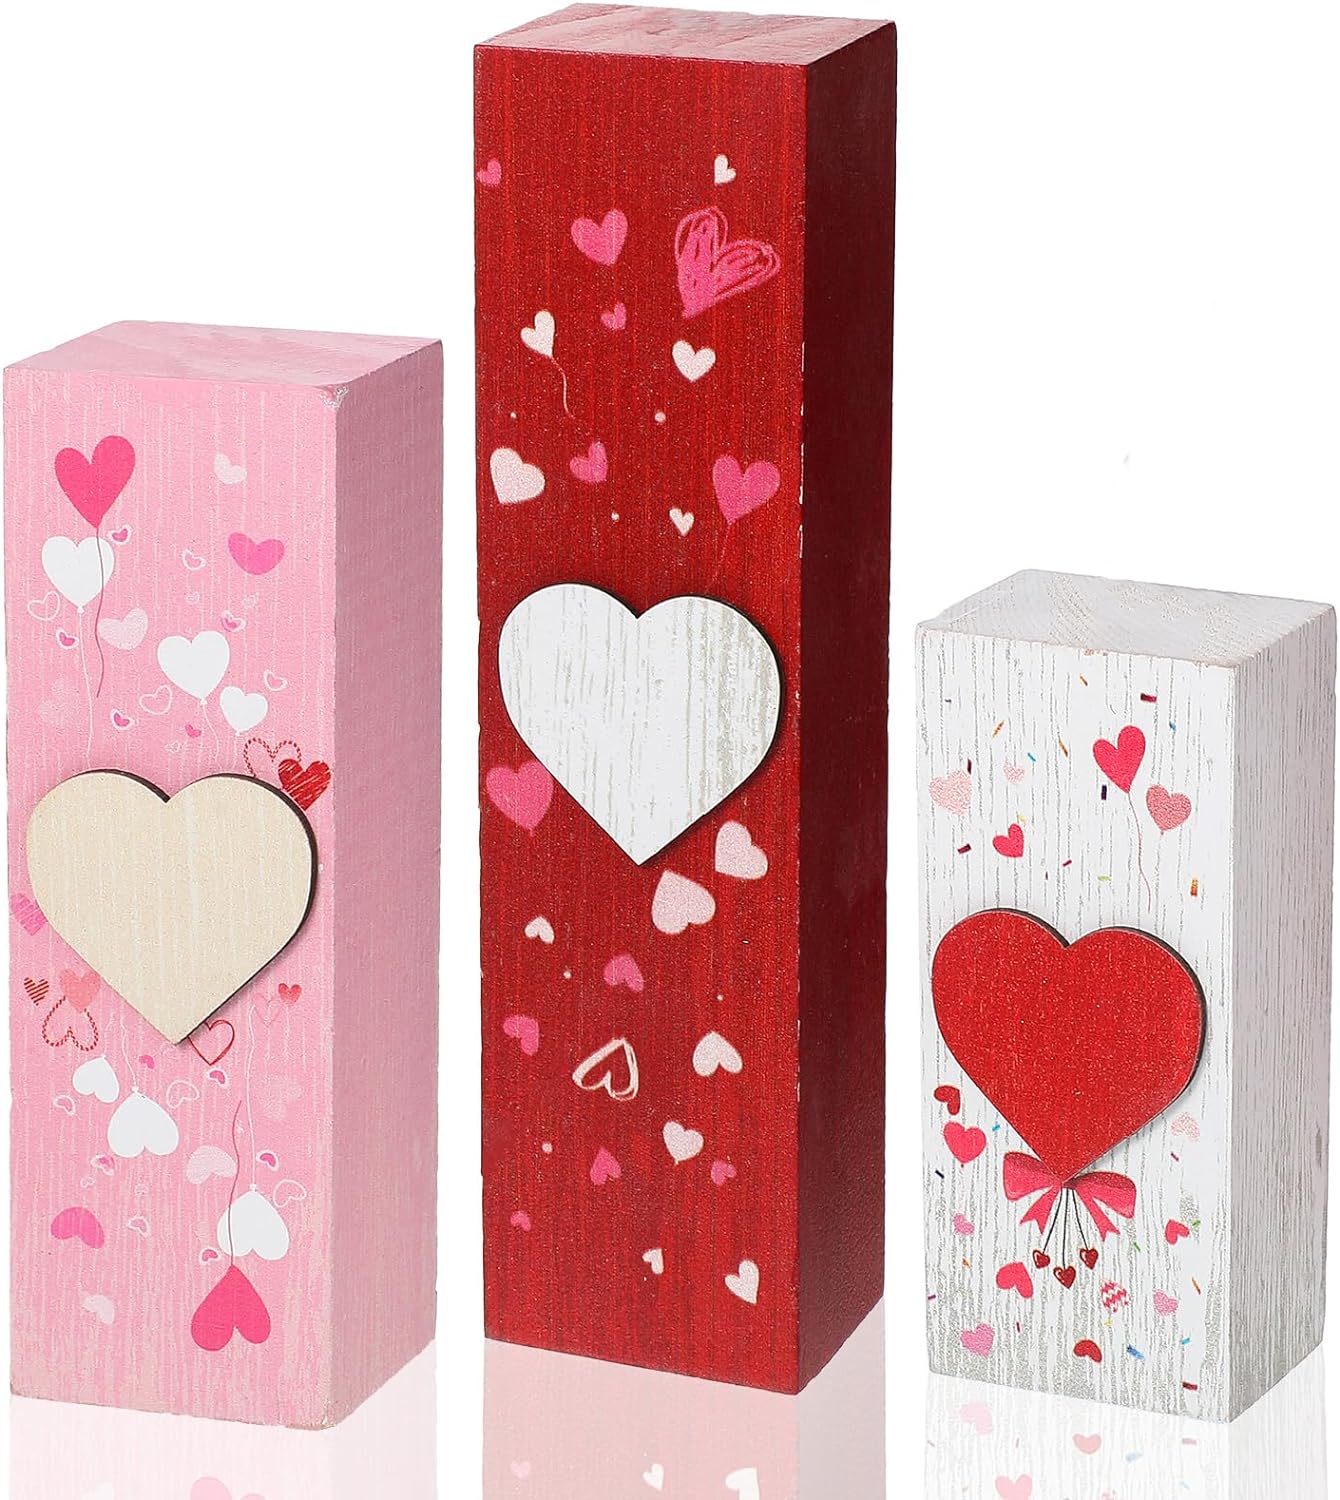 BBTO 3 Pcs Valentine' Day Decorations Valentine' Day Table Top Decor Valentines Tiered Tray Decor Heart Wood Block Sign Table Centerpiece for Valentine' Day Home Party Decor